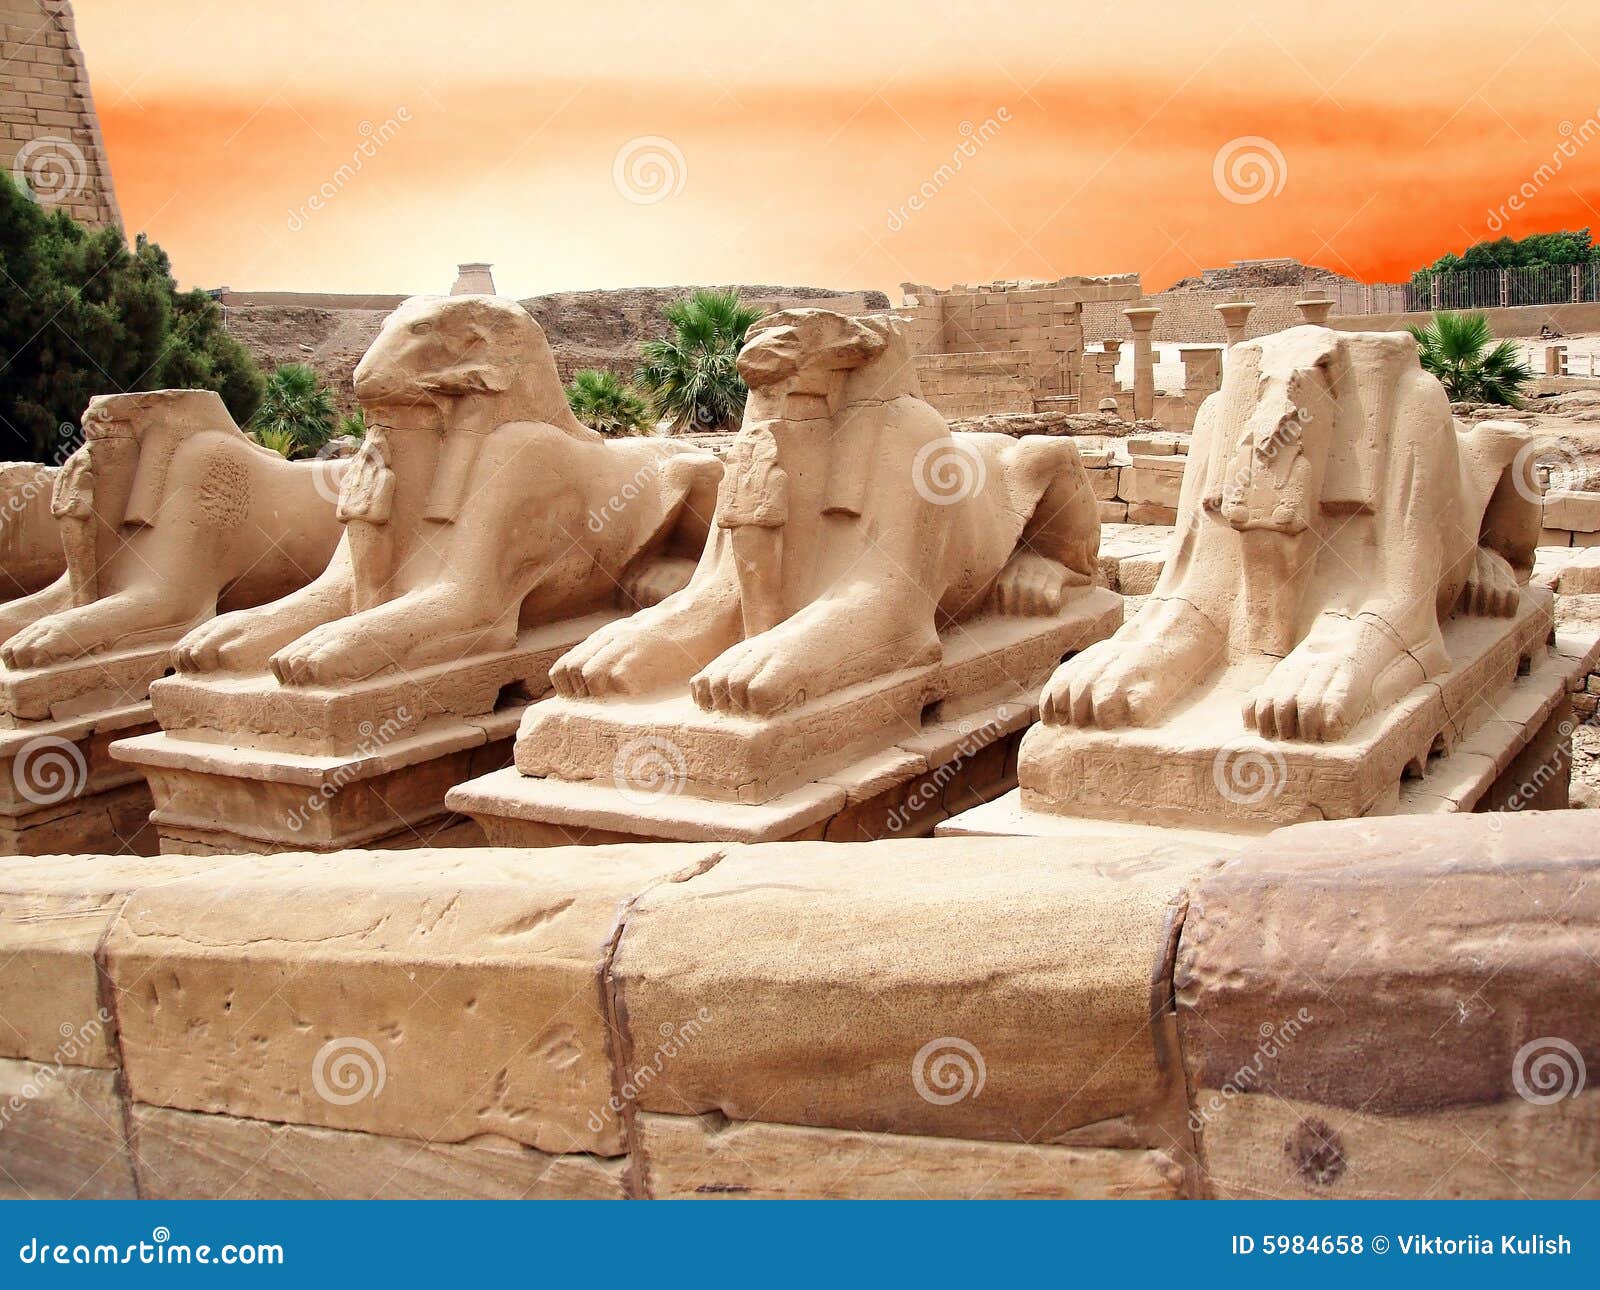 statues in a egypt